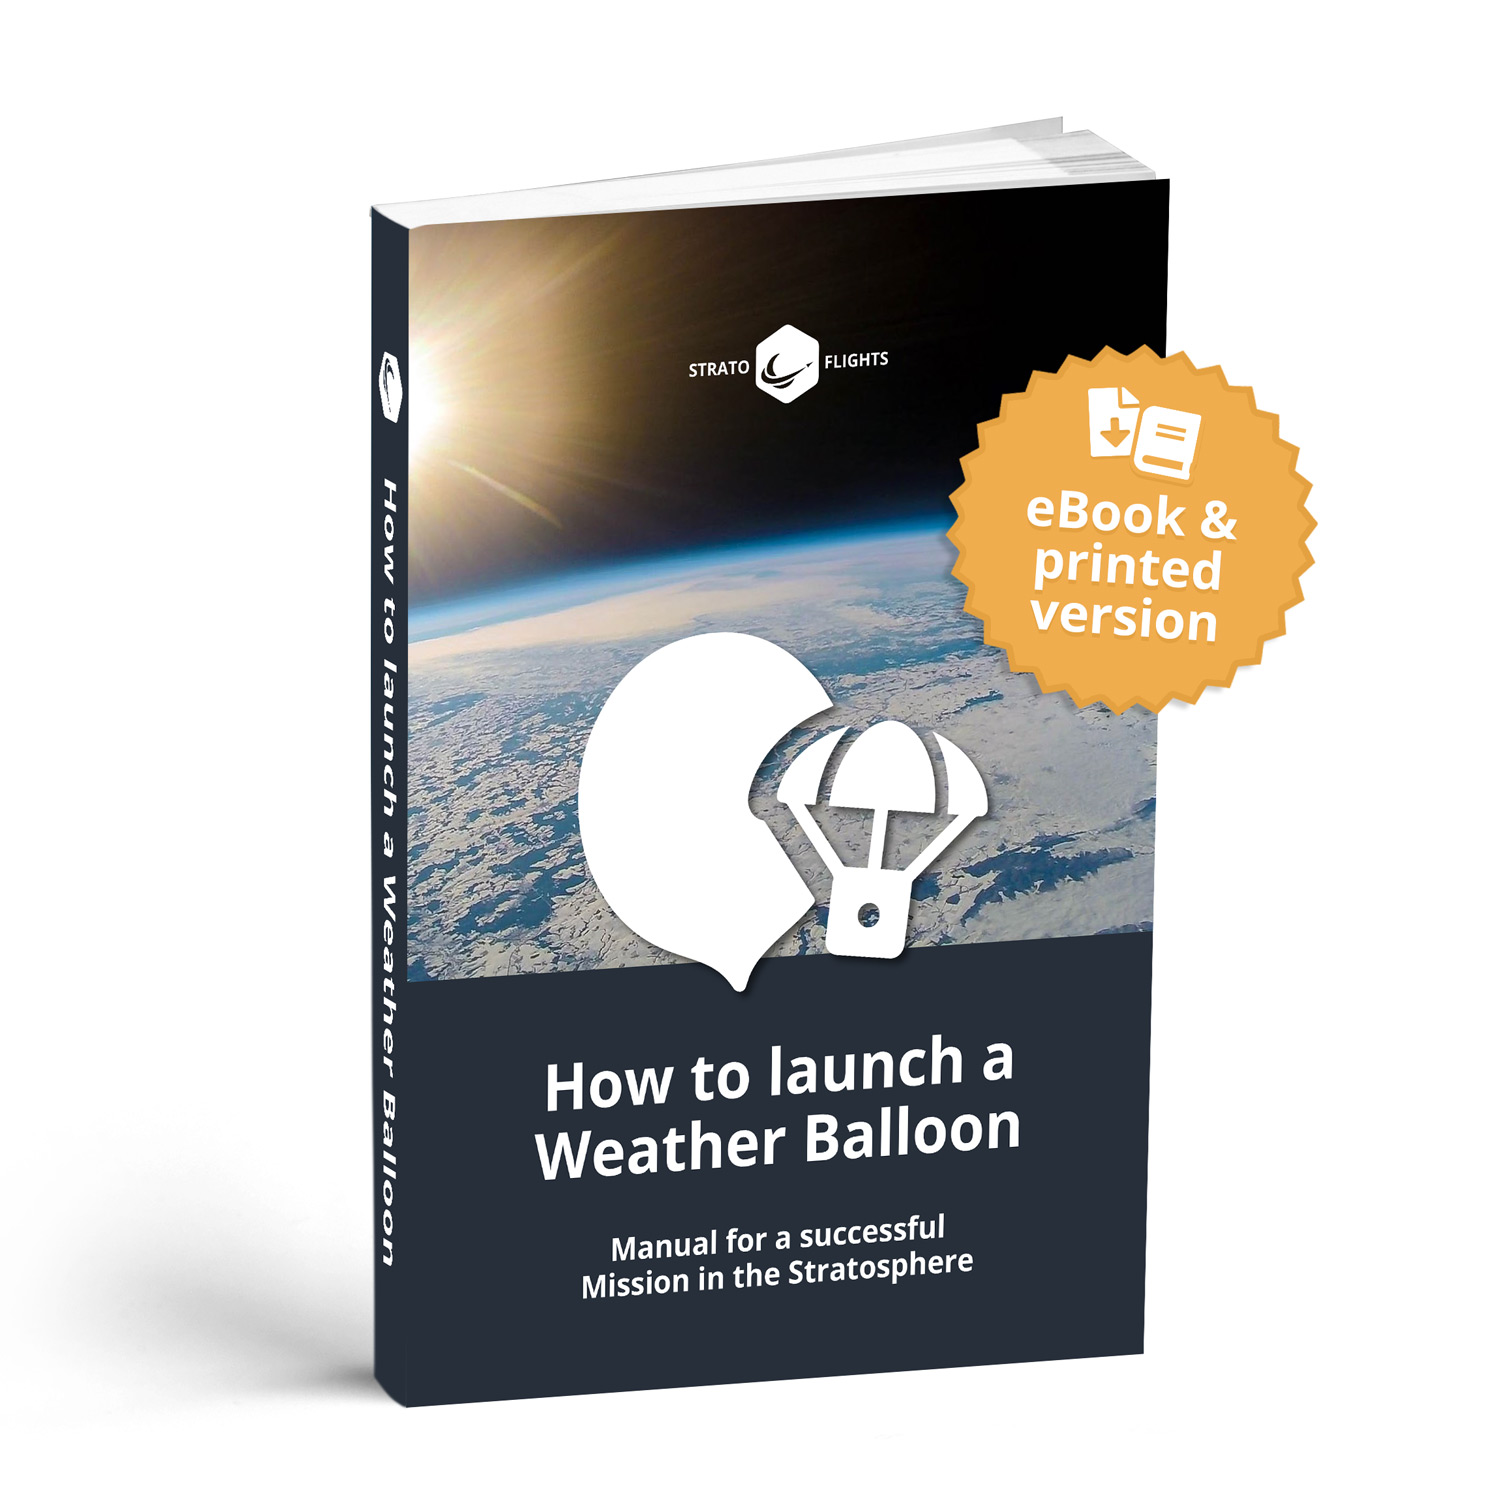 How to launch a Weather Balloon